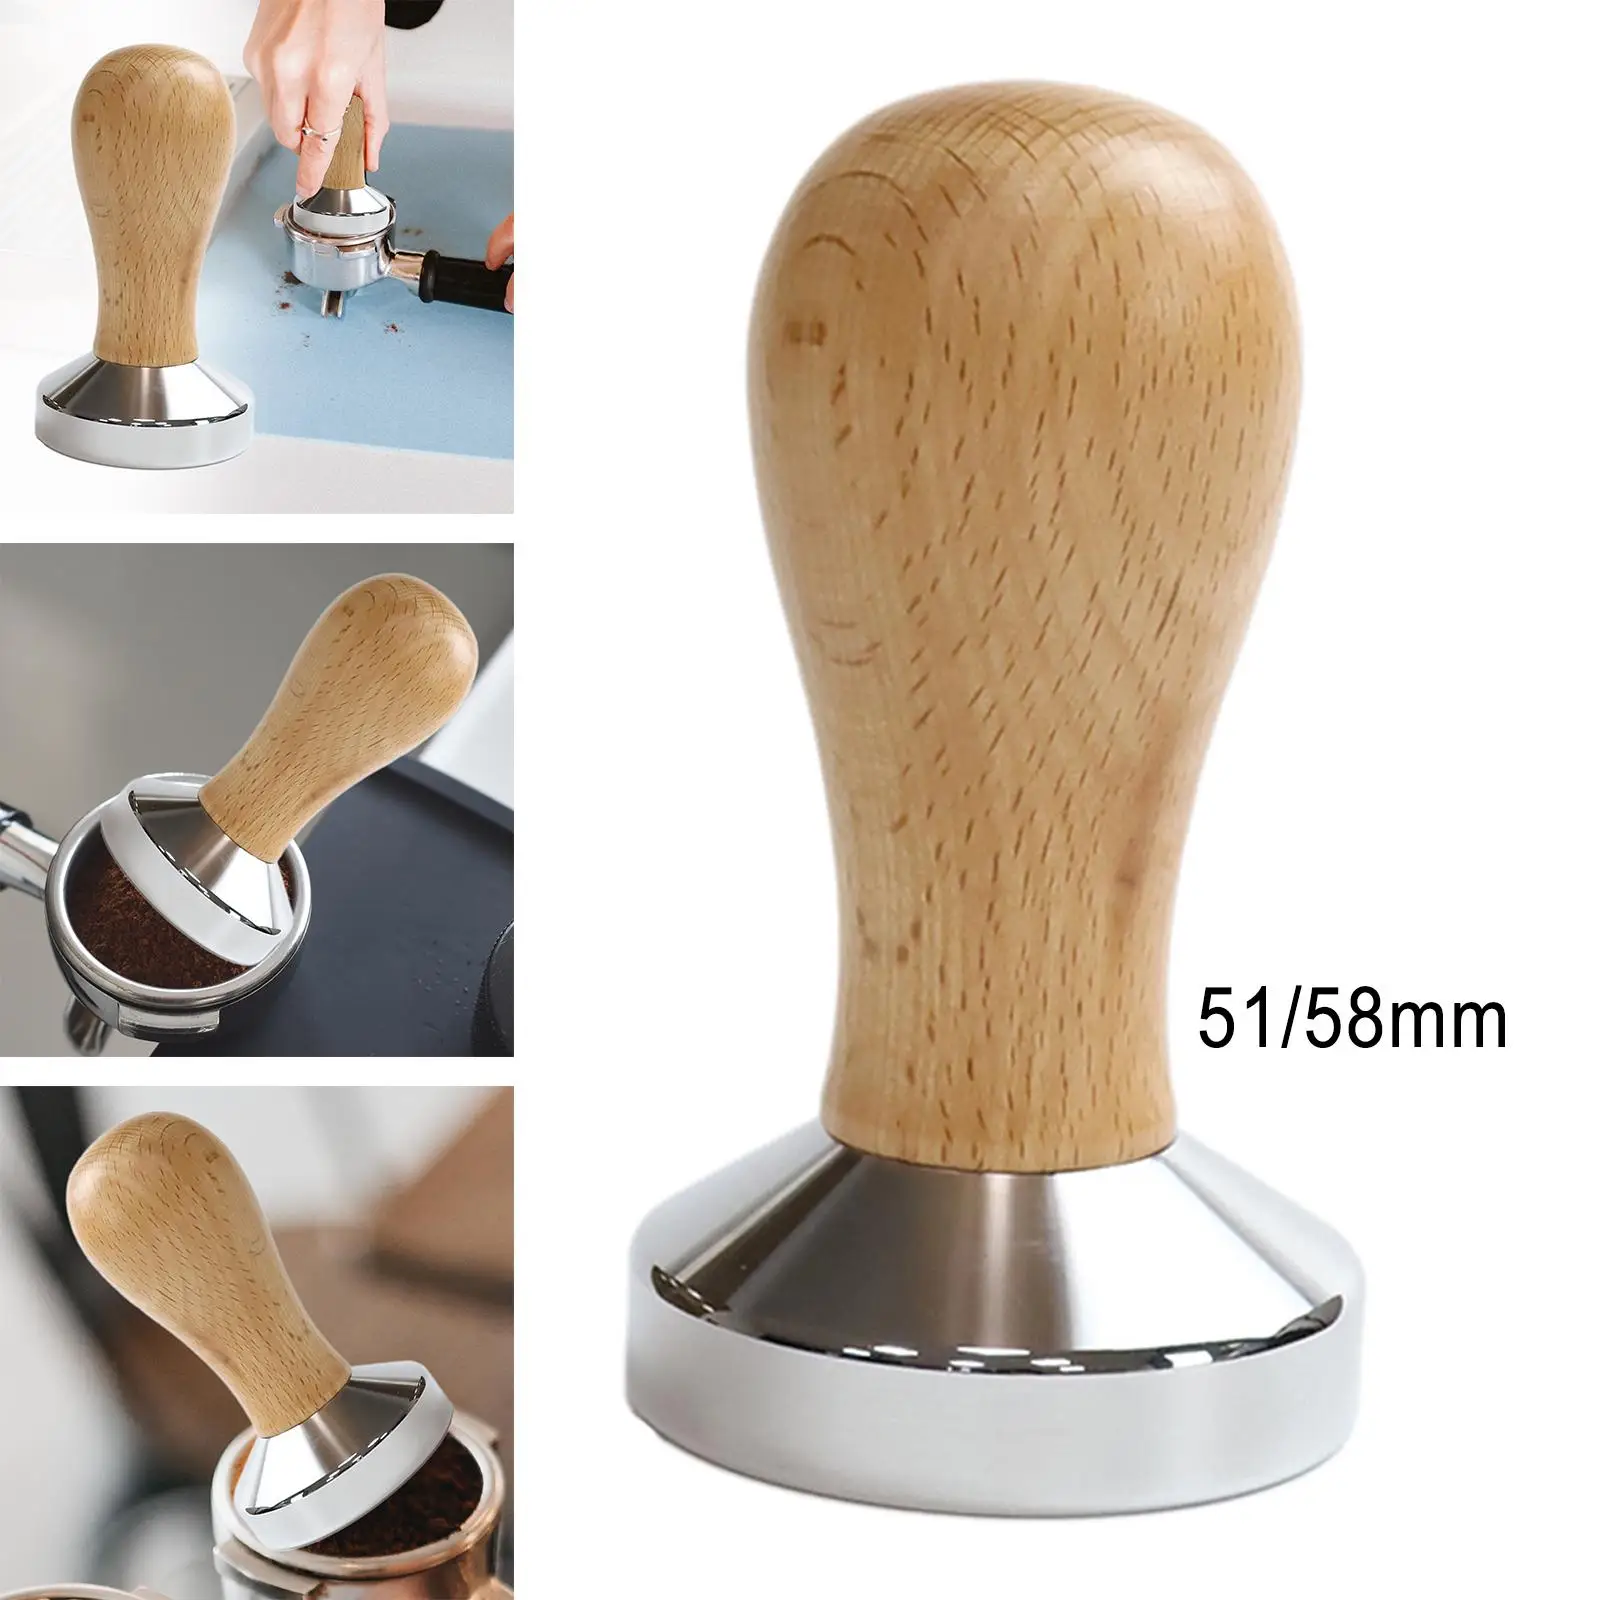 Professional Coffee Tamper Wood Handle Pressing Barista Tool Tools Powder Hammer Leveler Espresso Distributor for Home Office